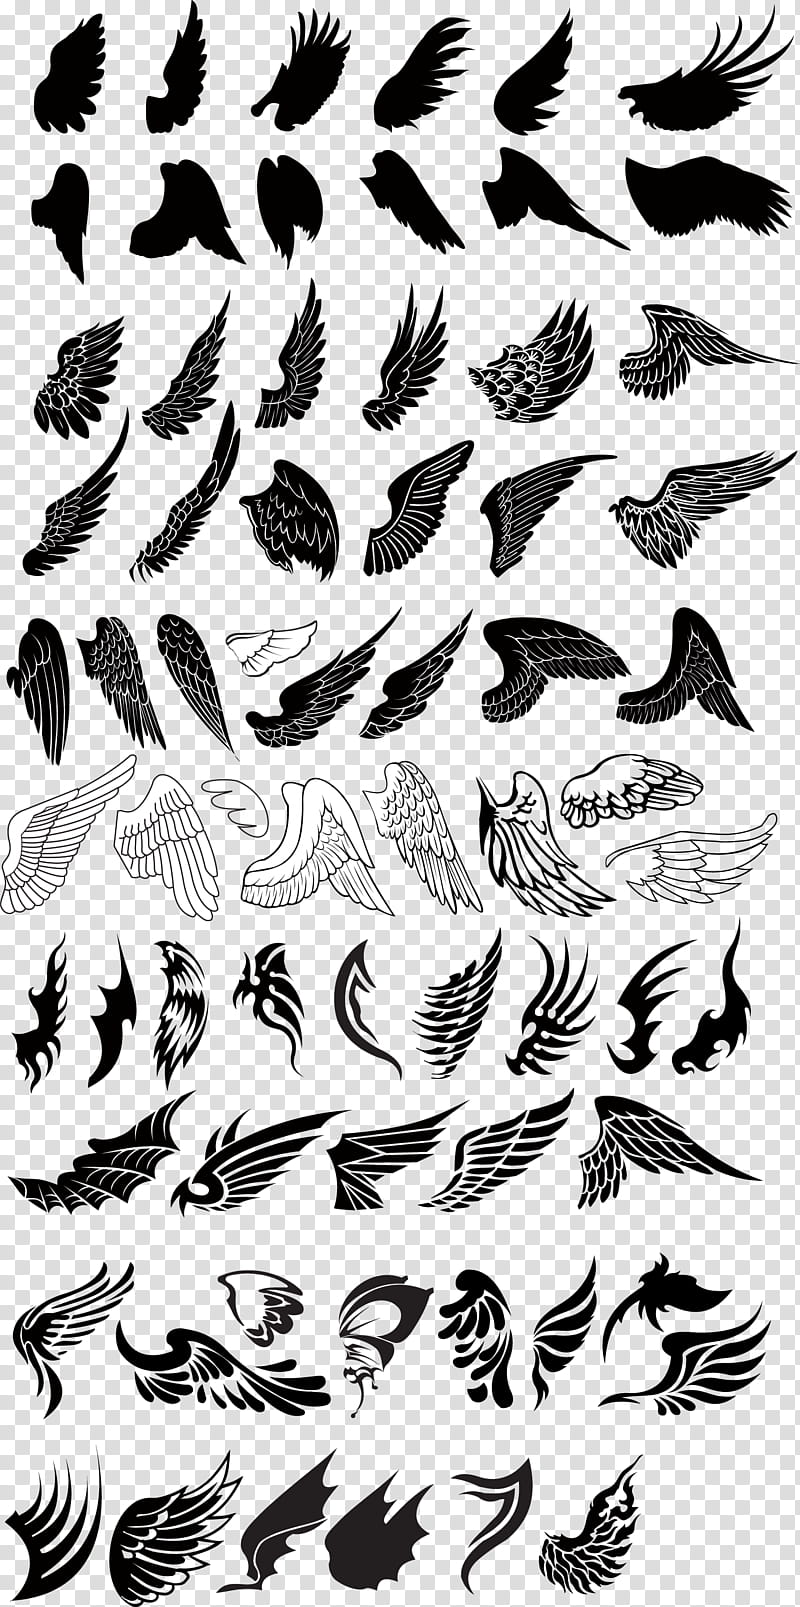 Wing File, white and black wings collage transparent background PNG clipart